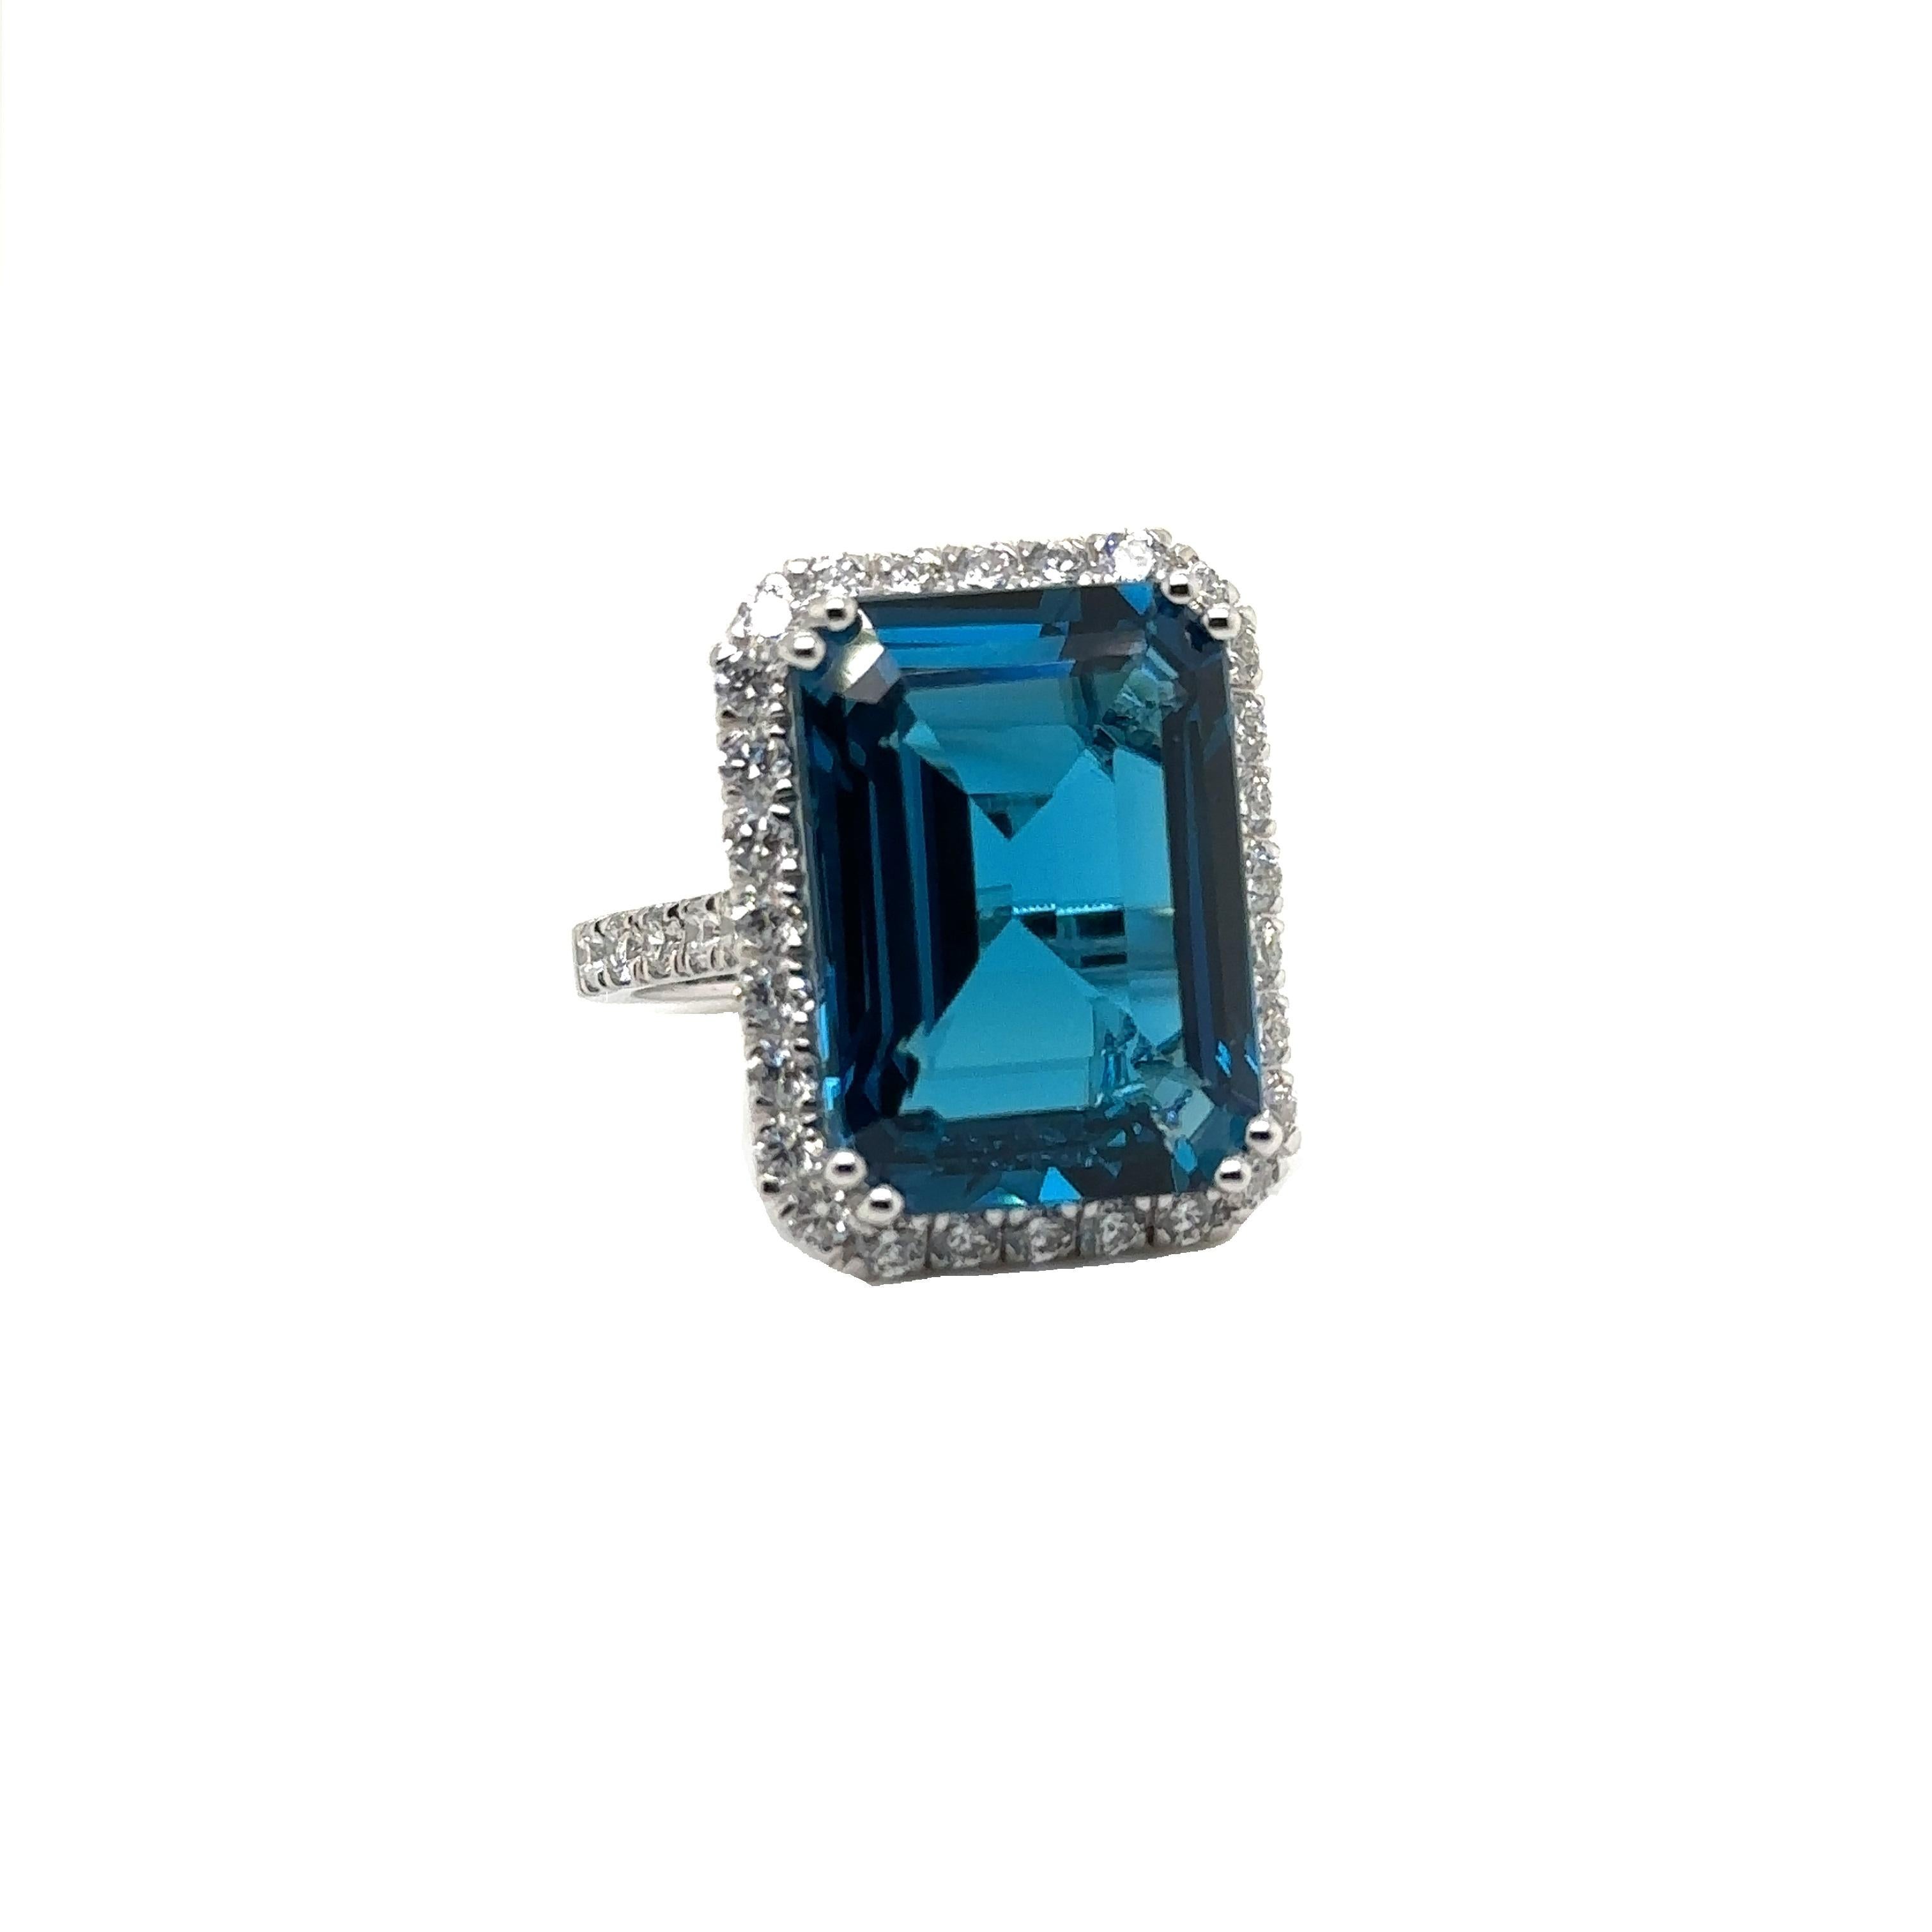 JAS-21-2245 - 14K WG 1.25ct GH-SI1 DIAMONDS & EMERALD CUT LONDON BLUE TOPAZ RING In New Condition For Sale In New York, NY